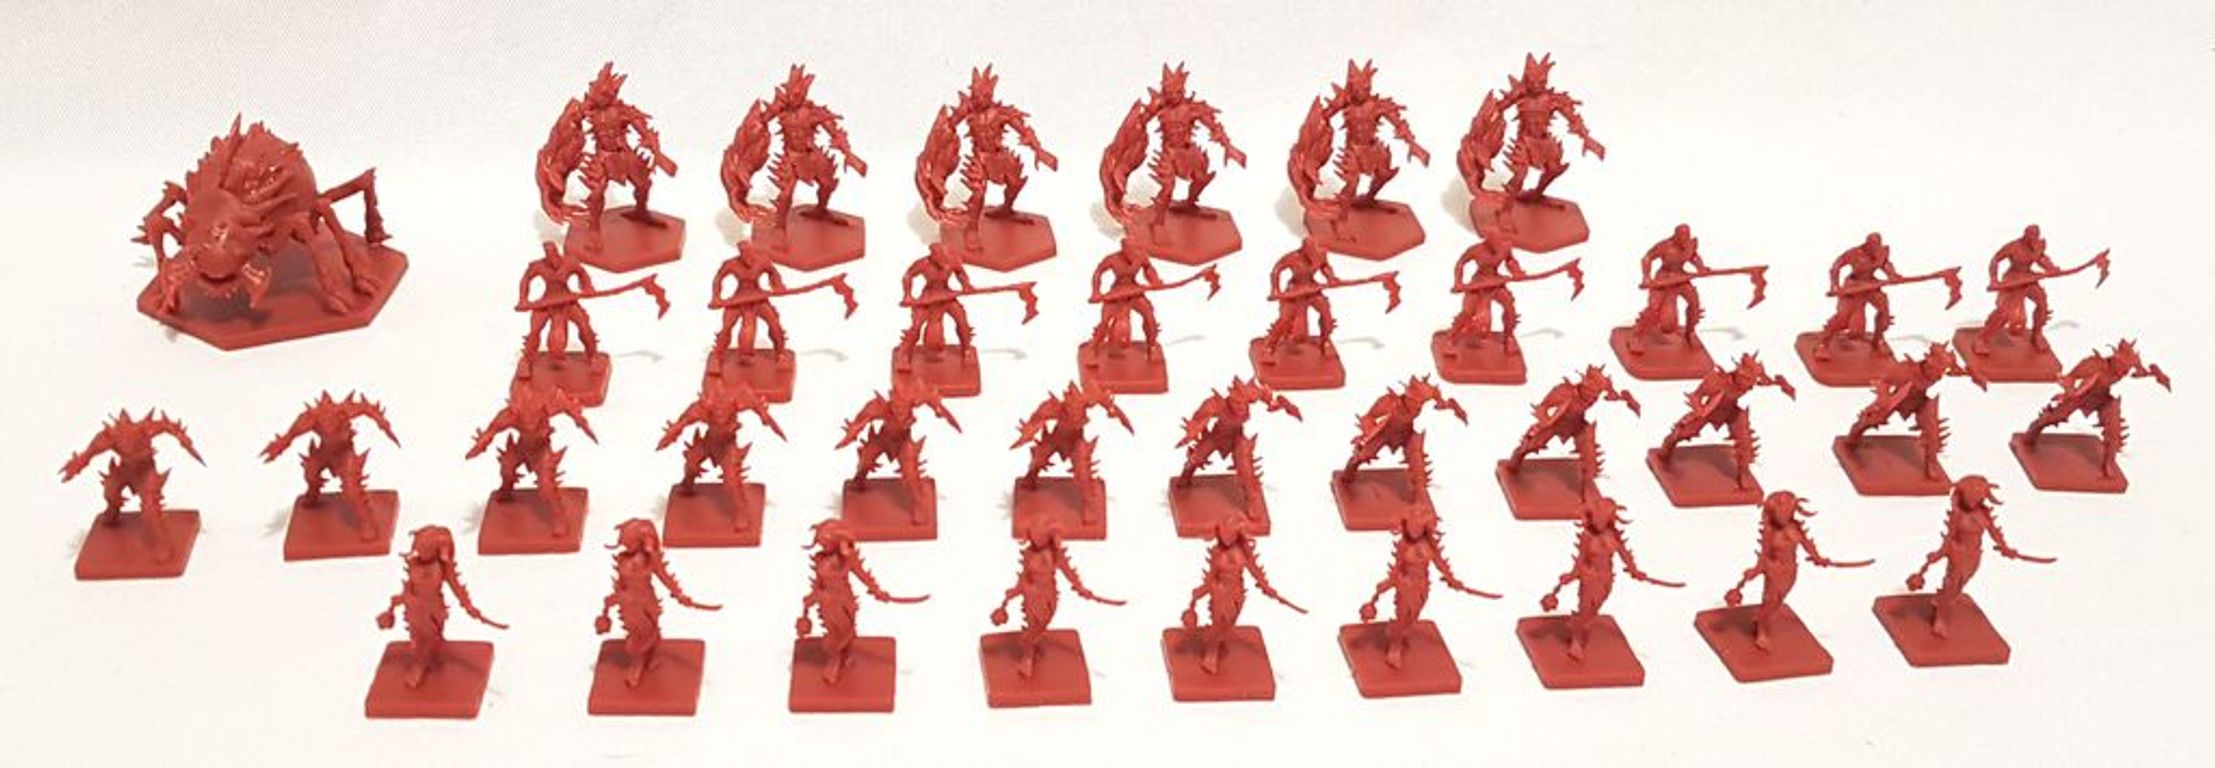 BattleLore (Second Edition): Warband of Scorn Army Pack miniatures